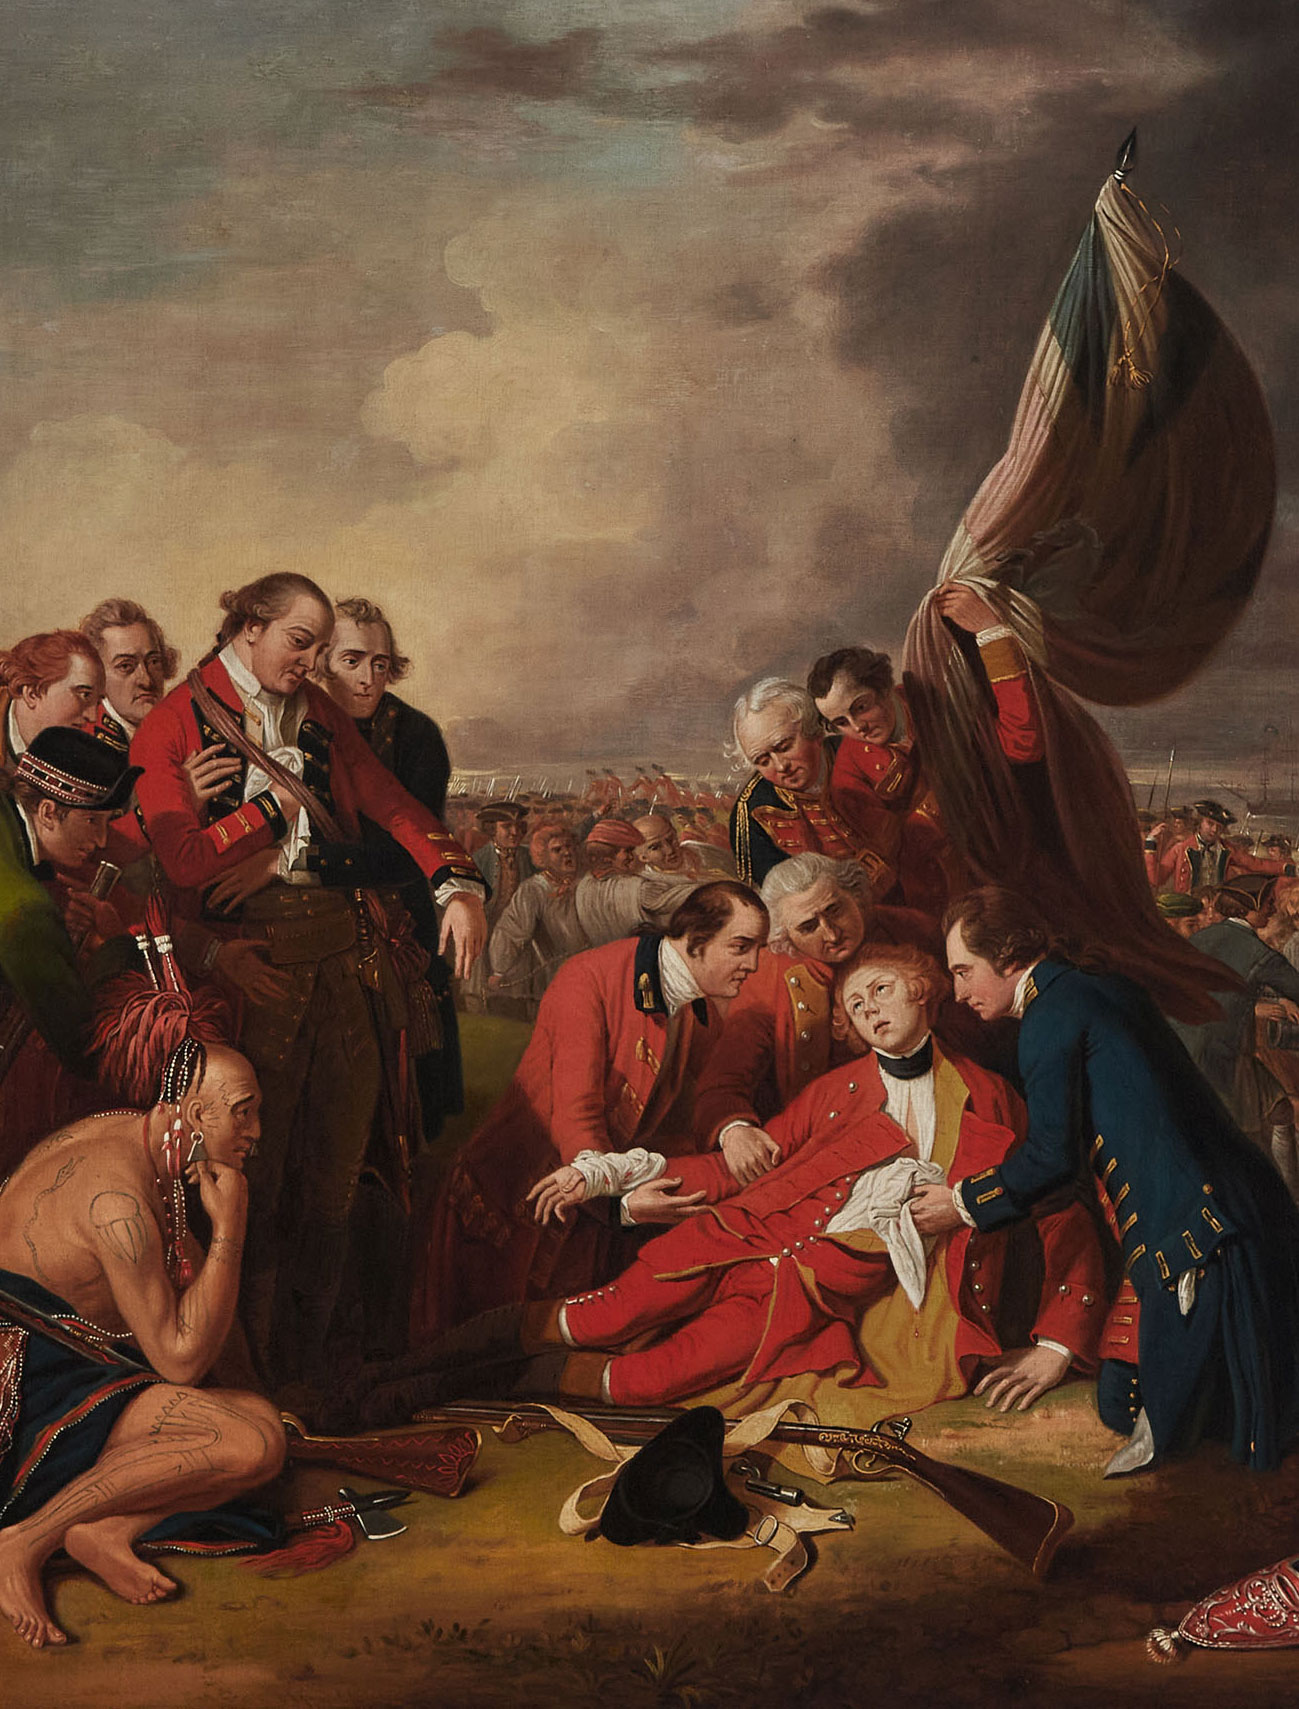 The Allure of Benjamin West's “The Death of General Wolfe”